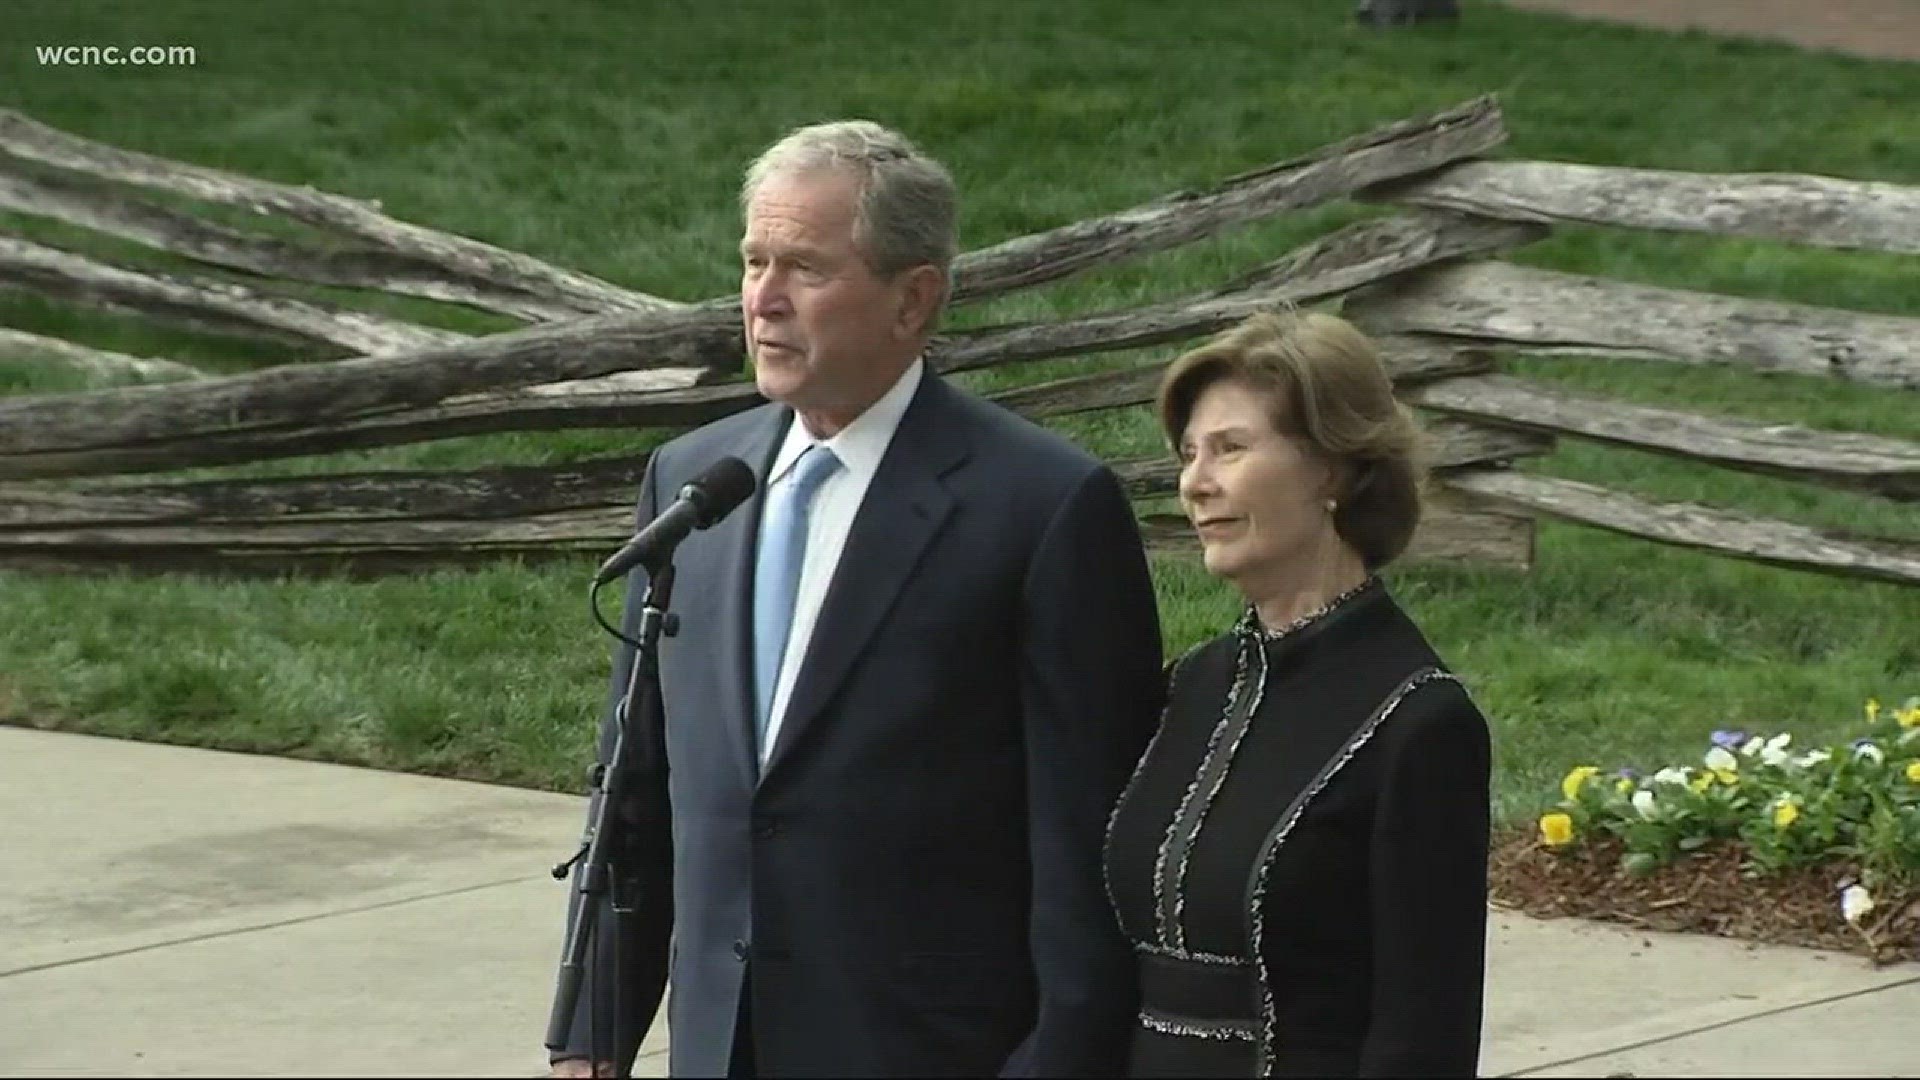 Former President George W. Bush and his wife Laura were in Charlotte Monday to pay their respects to Rev. Billy Graham.